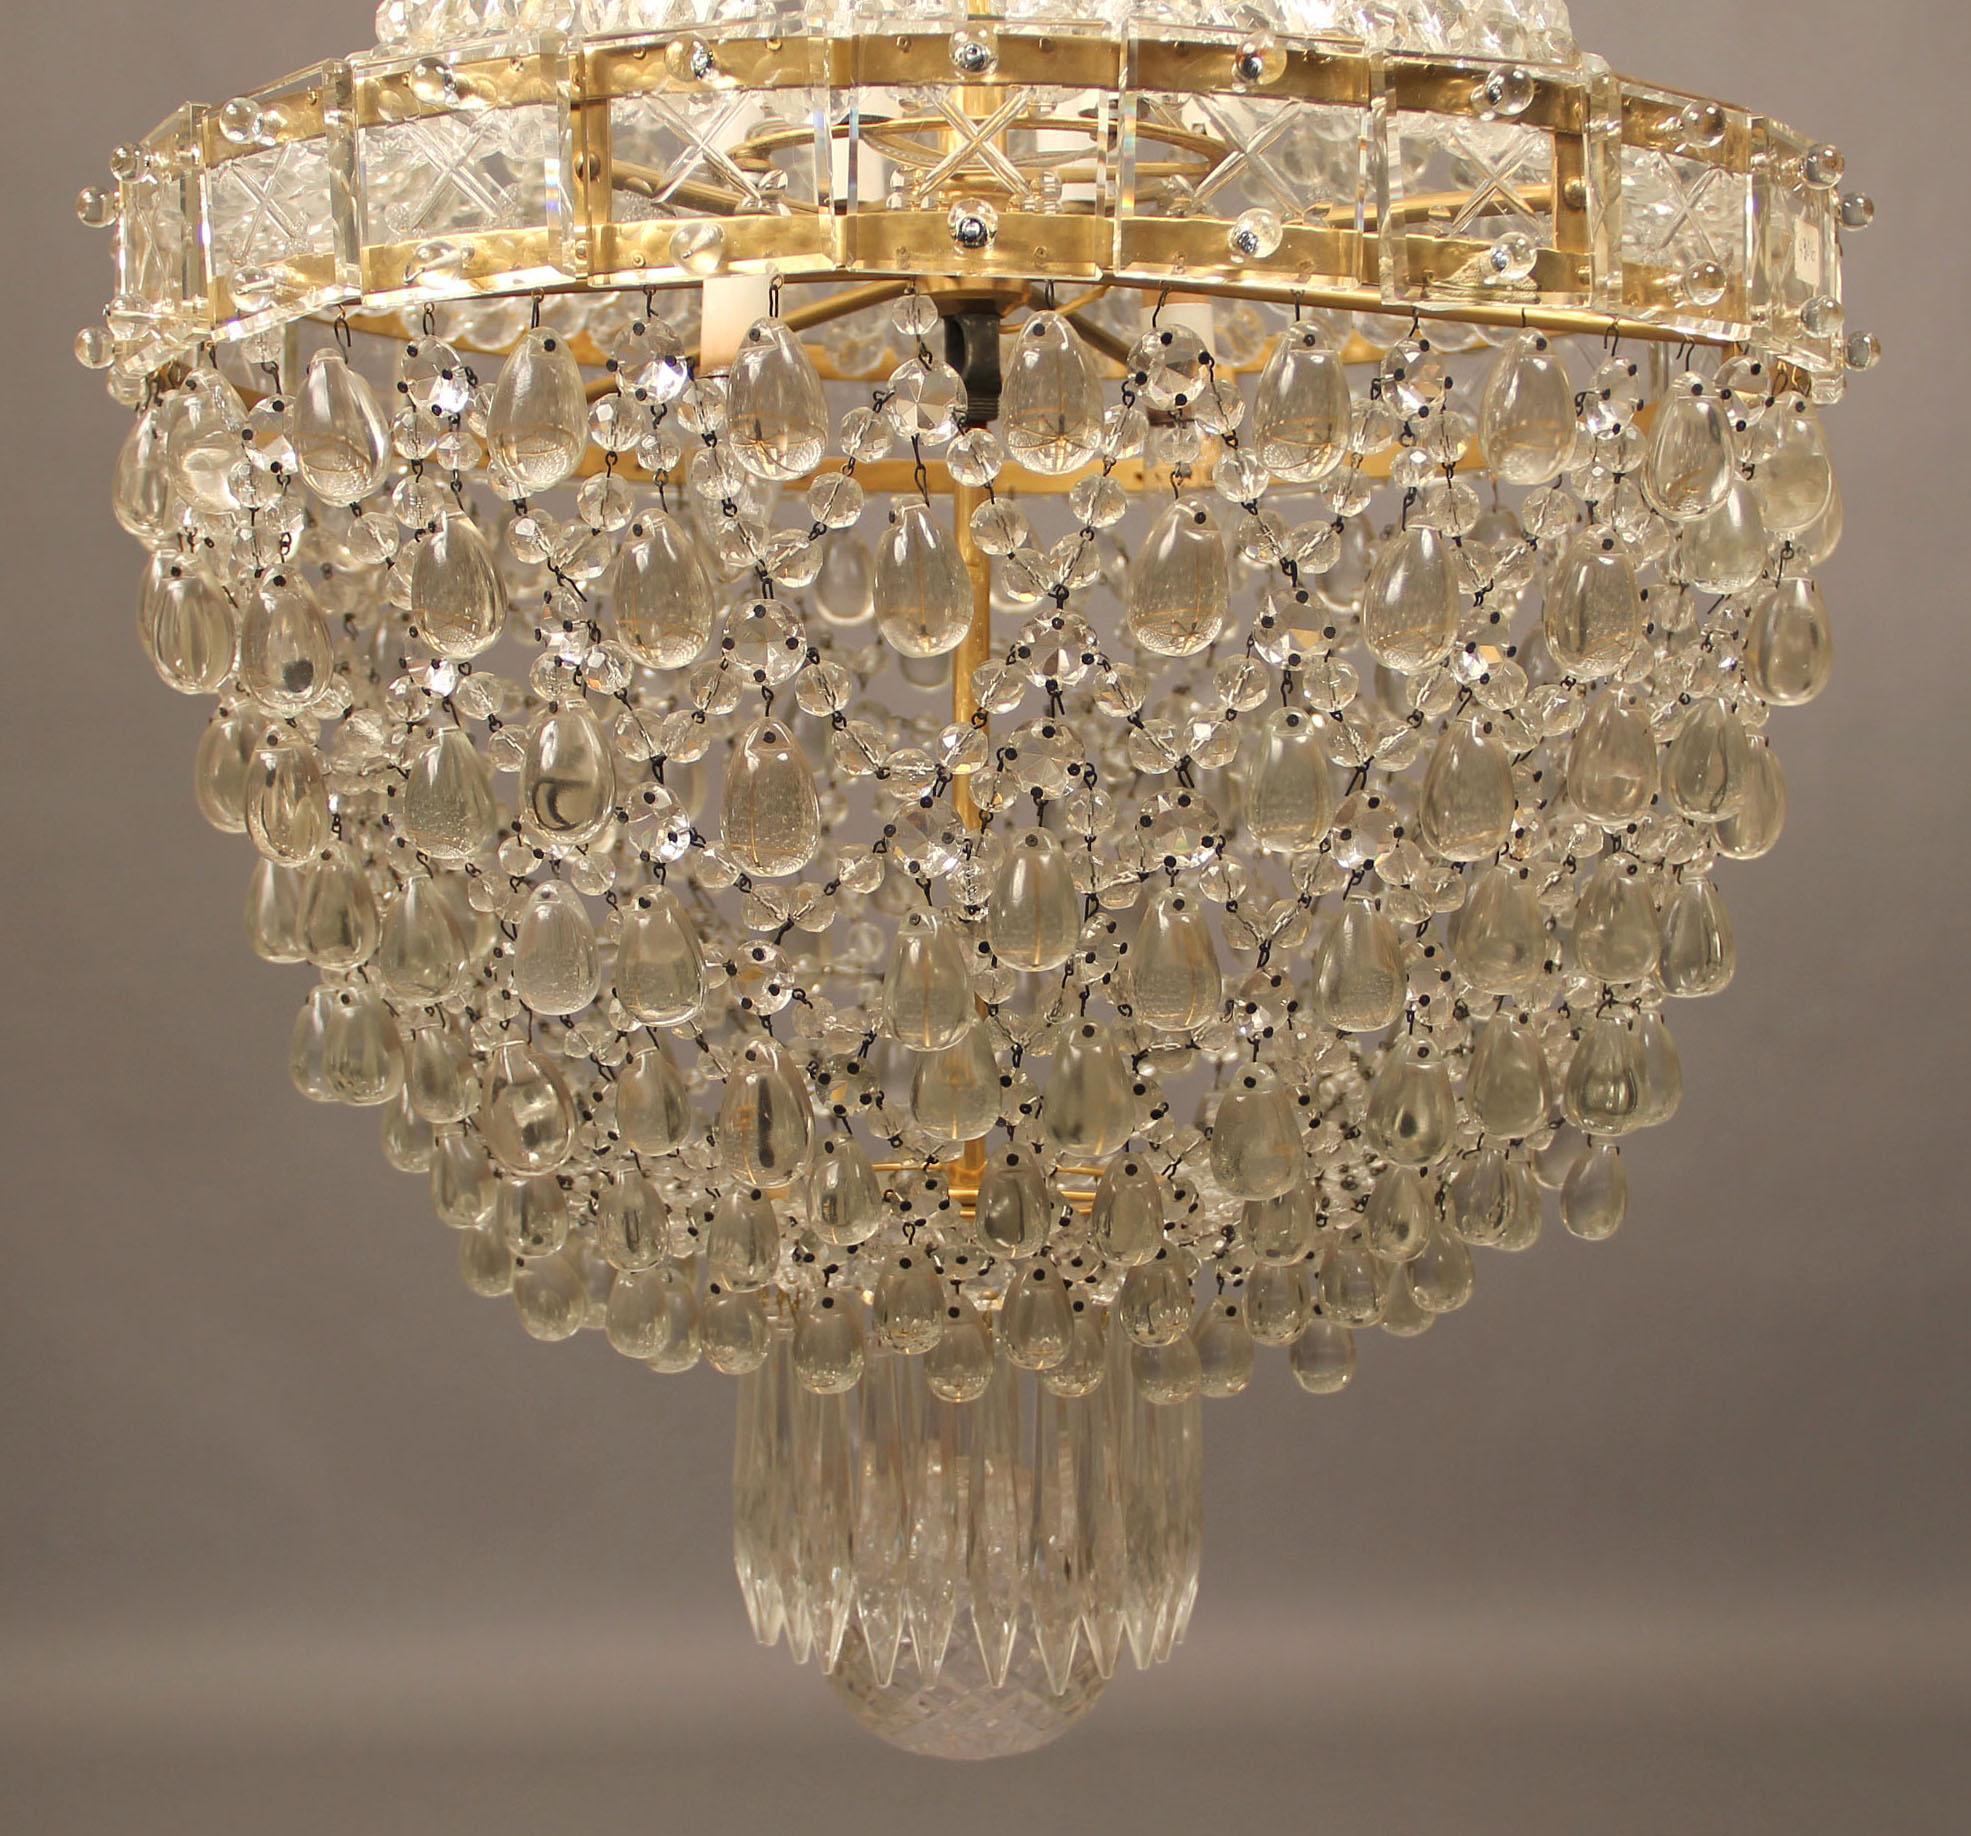 Belle Époque Late 19th/Early 20th Century Gilt Bronze and Beaded EightLight Basket Chandelier For Sale